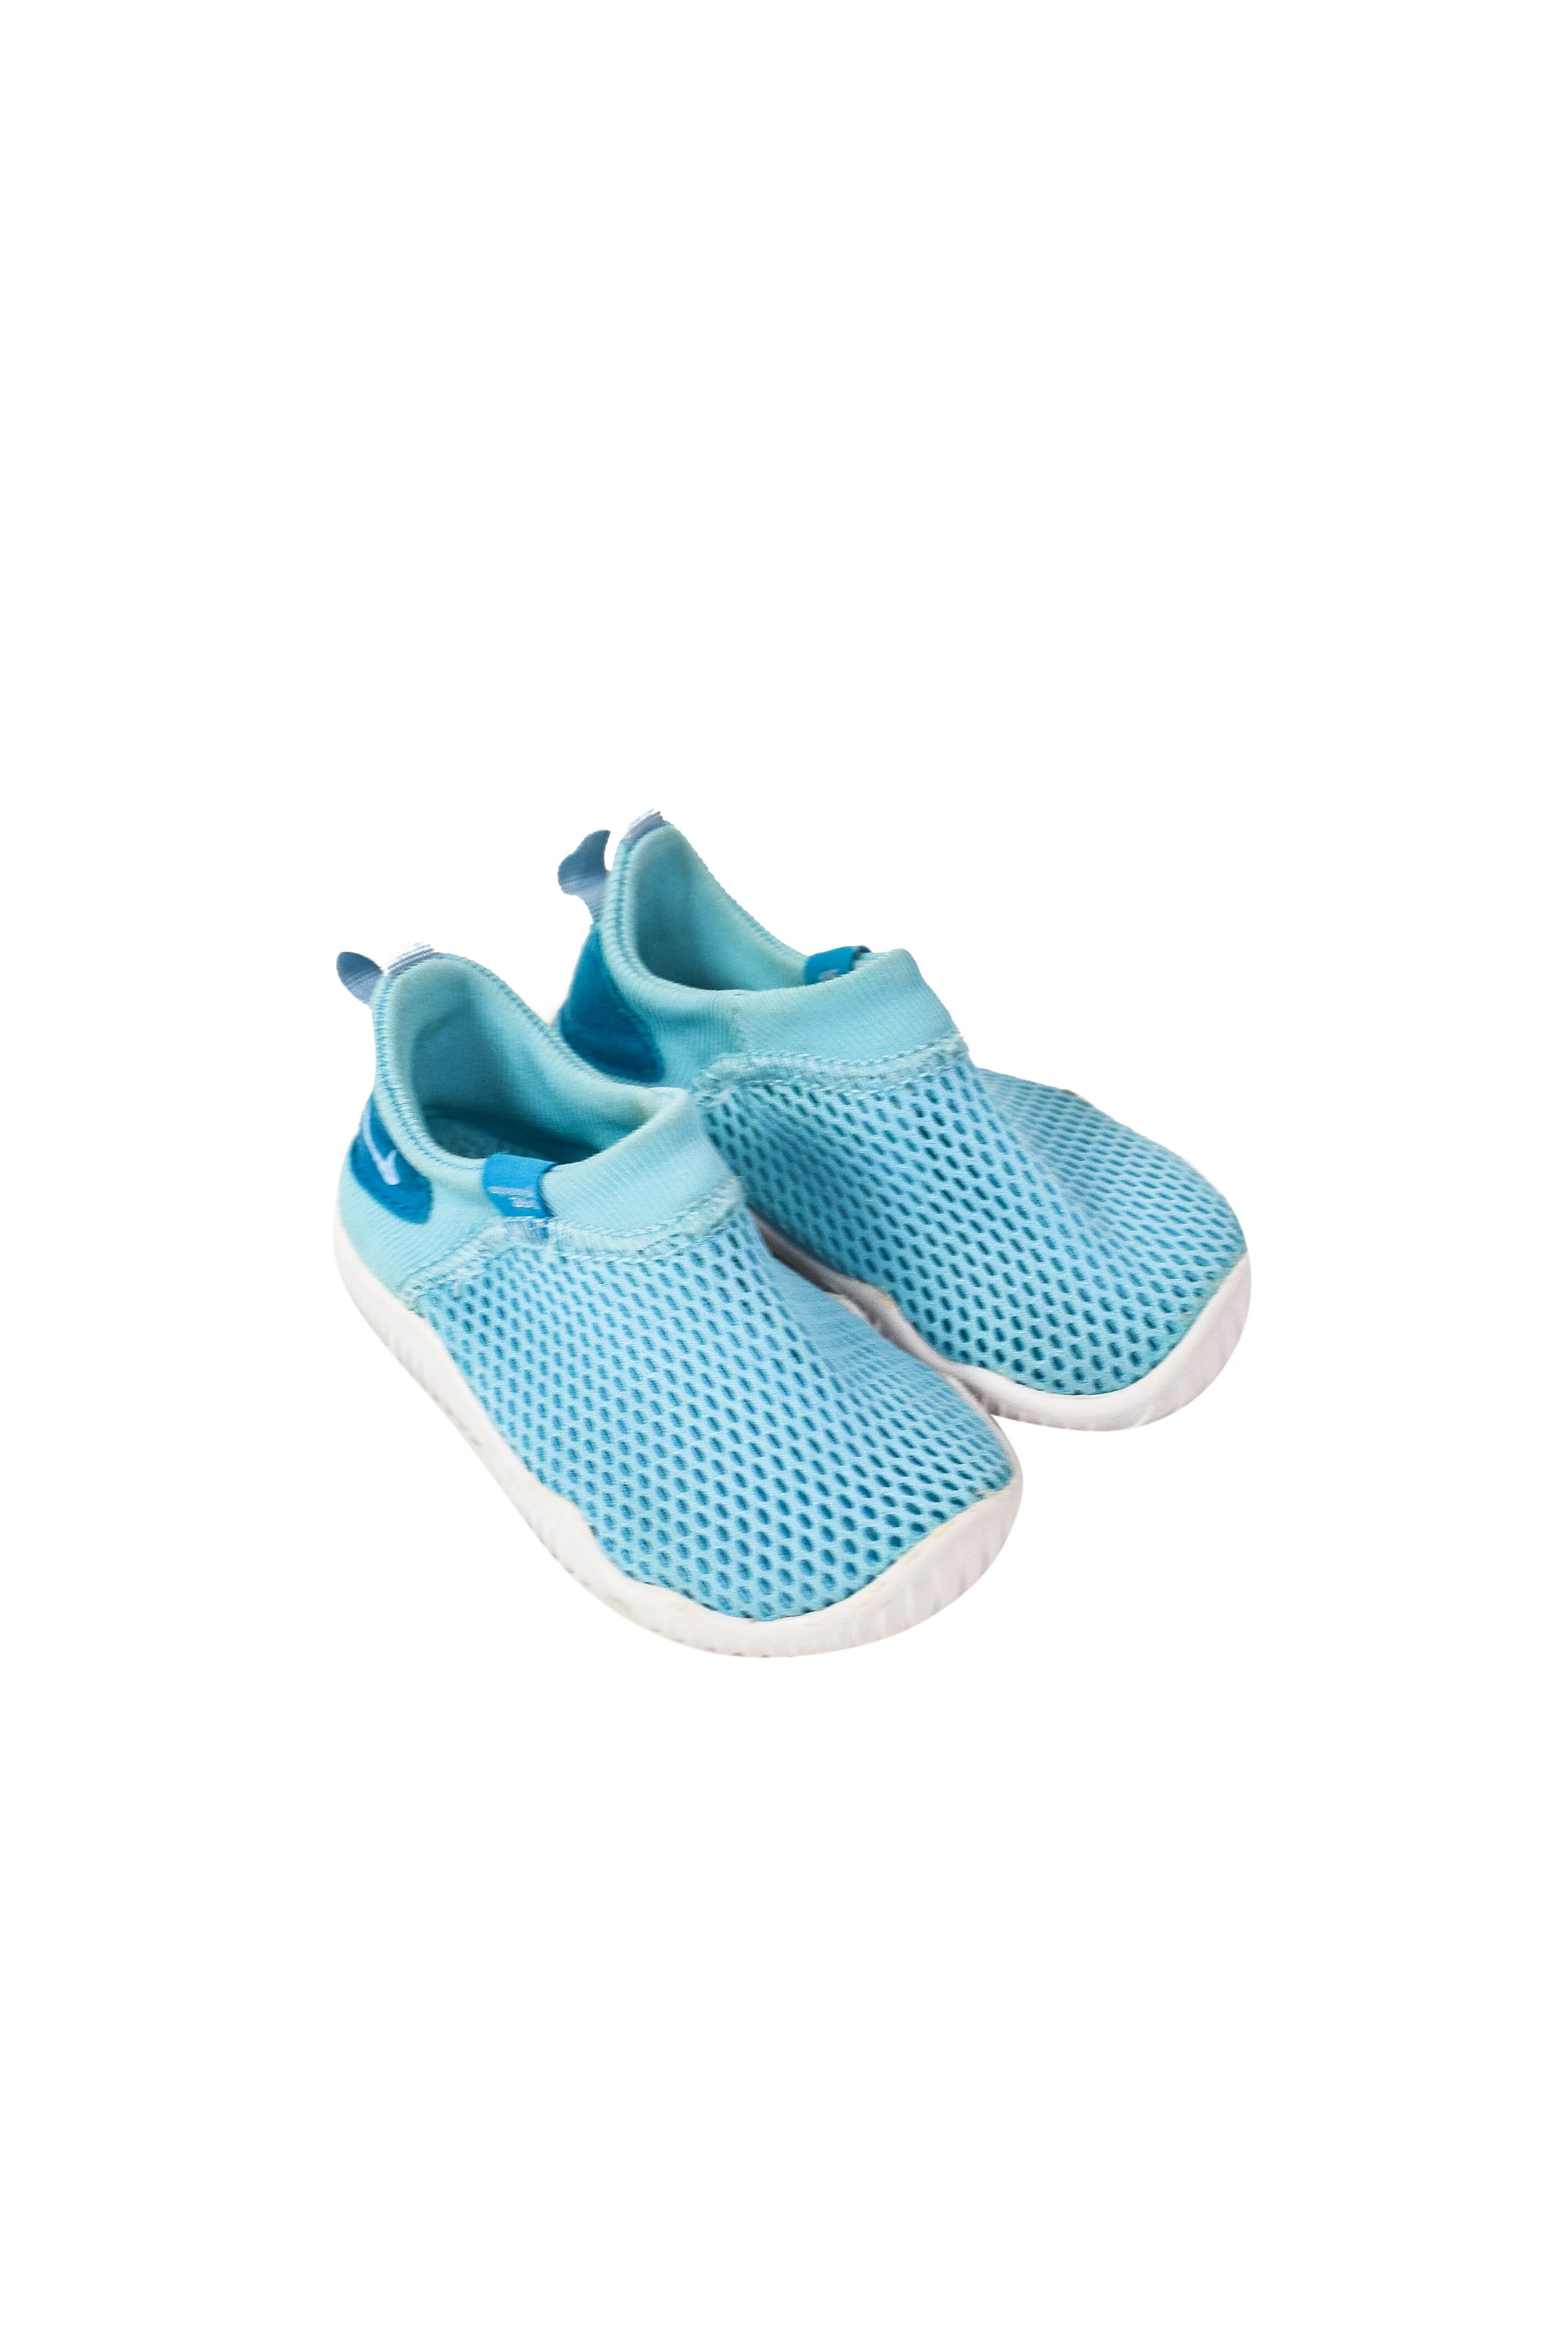 nike baby blue shoes